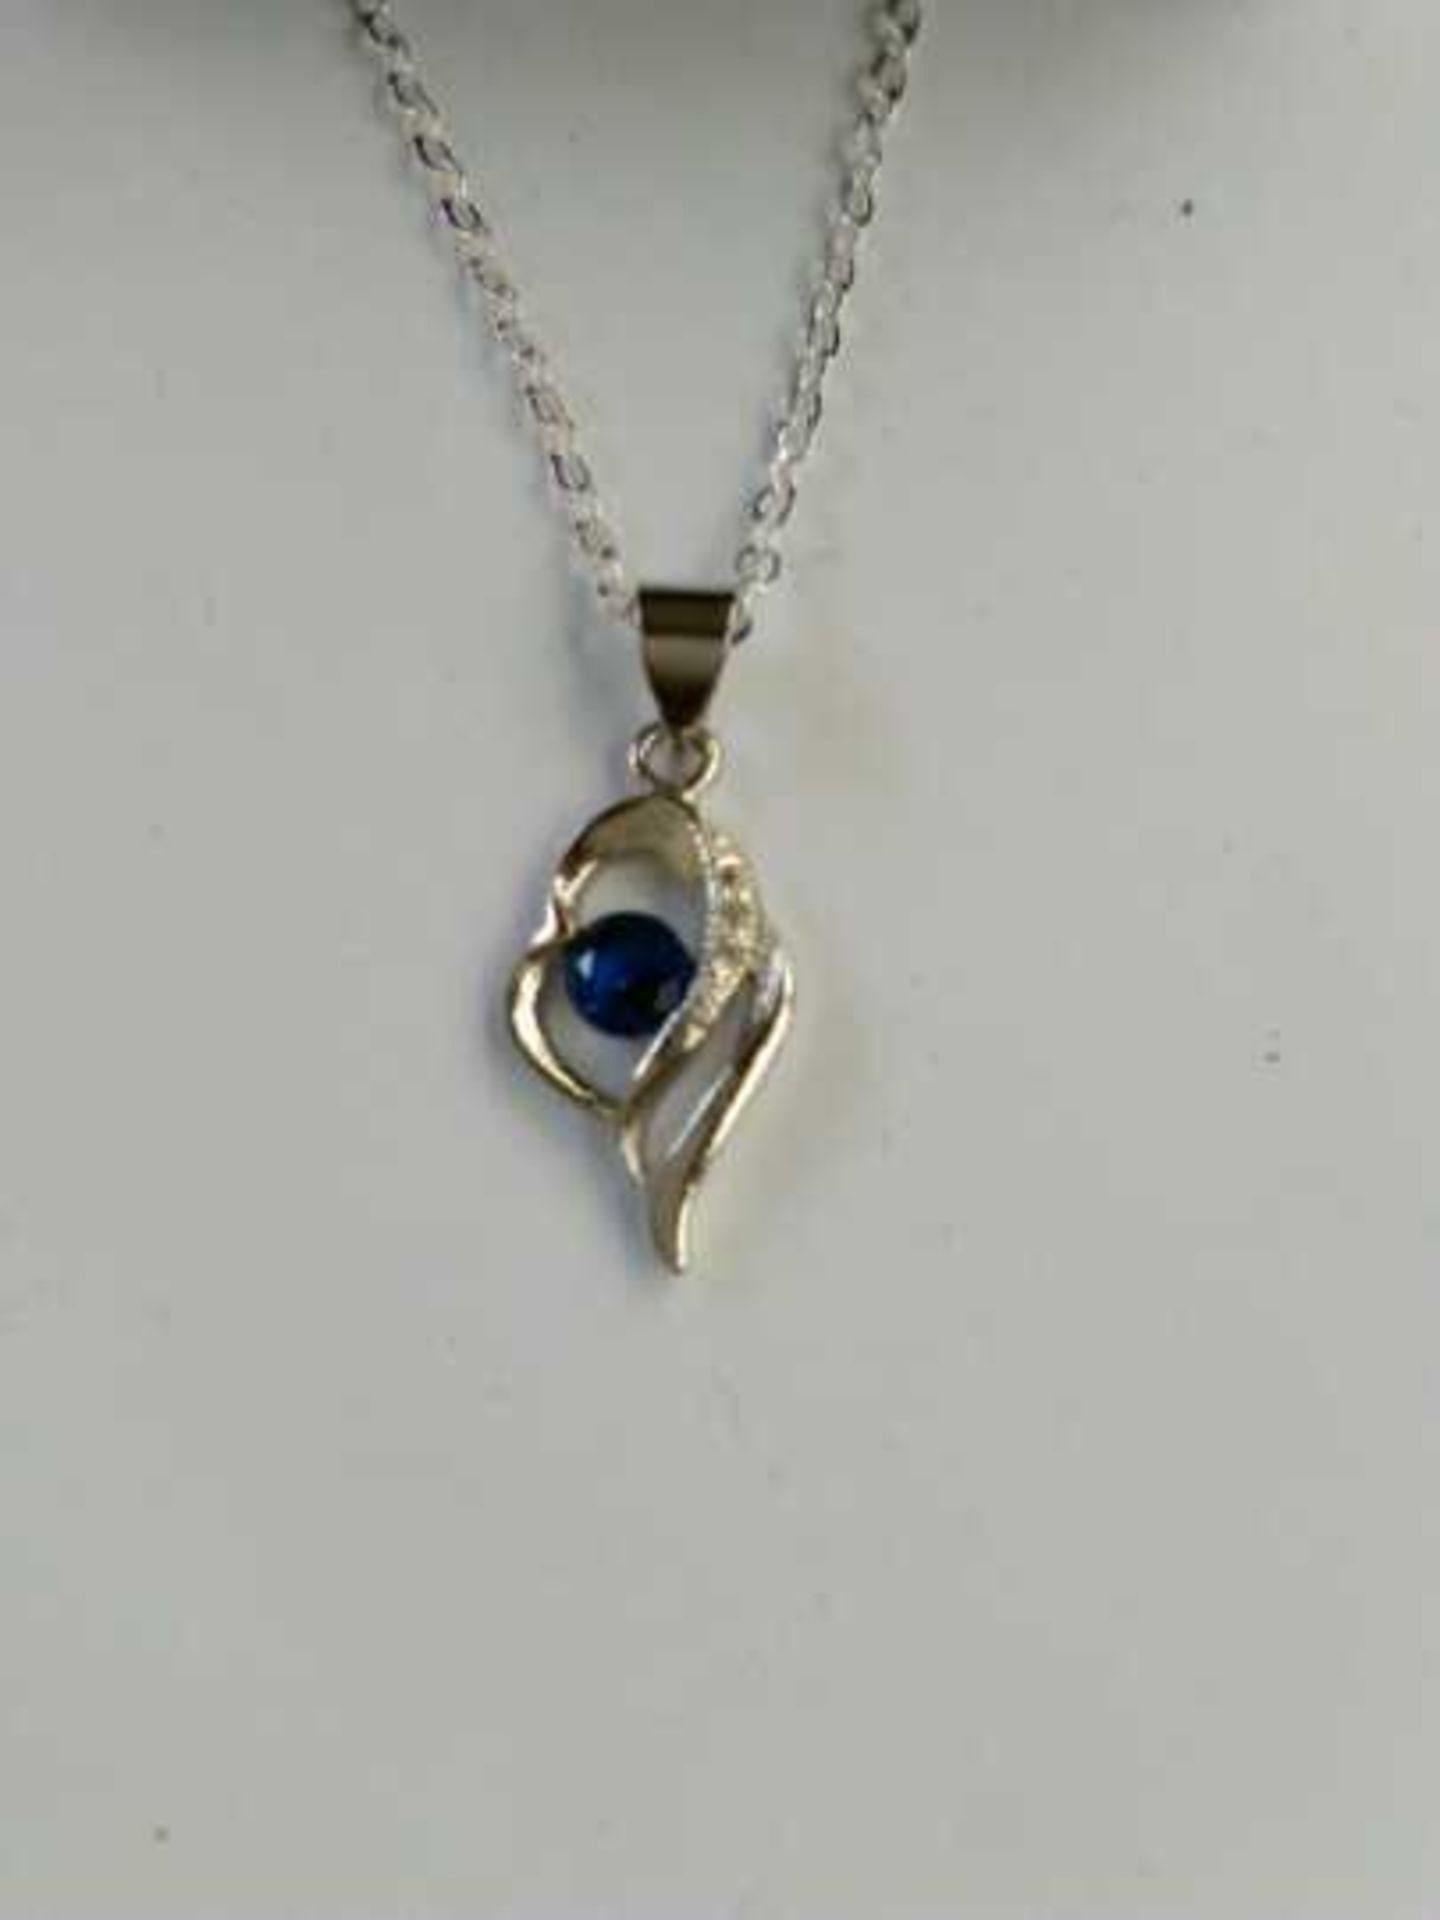 Fifth NYC White Gold Plated Necklace with Swarovski element Crystal, new in presentation box